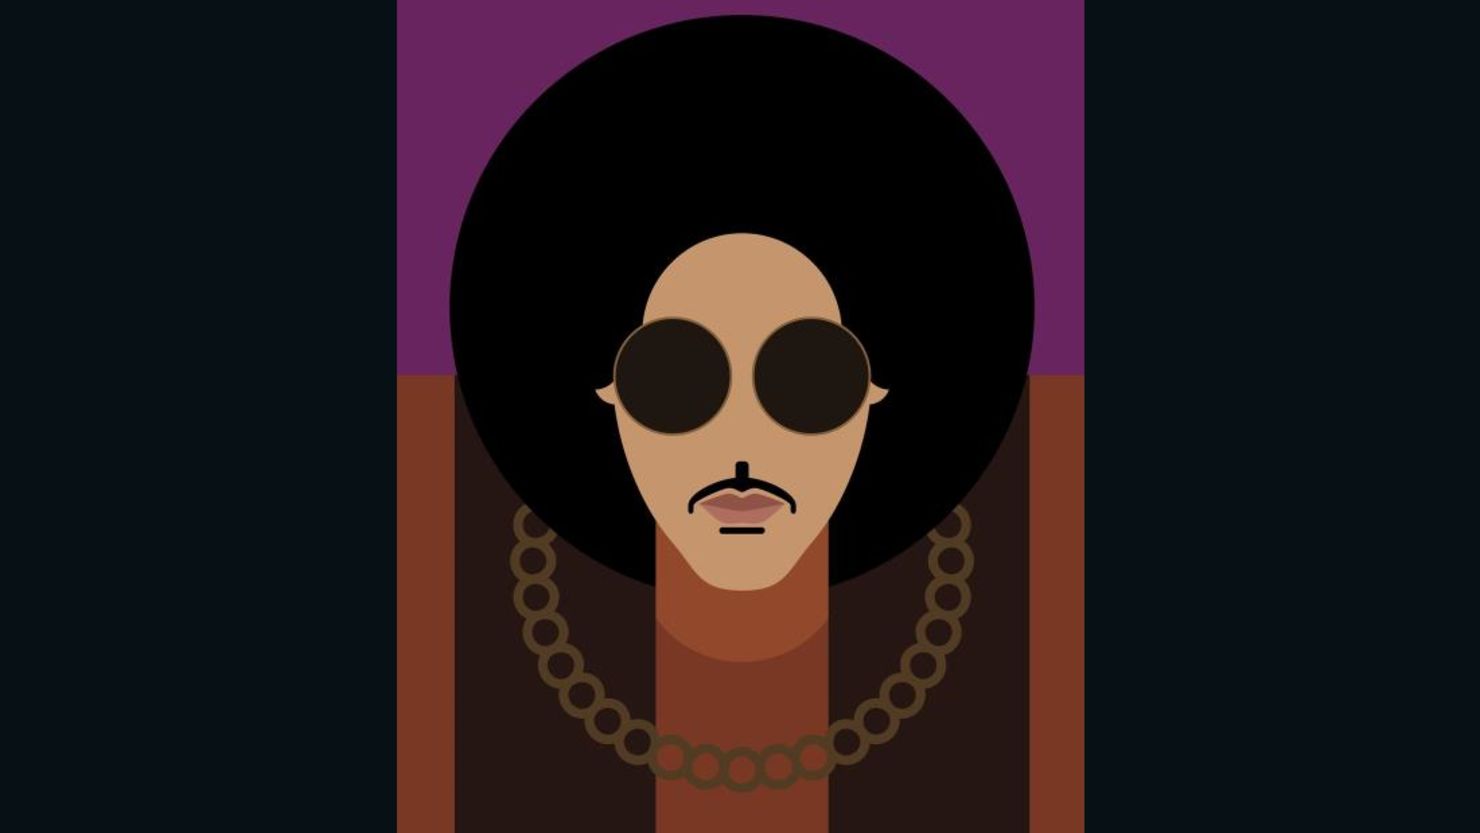 After recording an ode to Baltimore, Prince announces a Mother's Day rally and concert there.